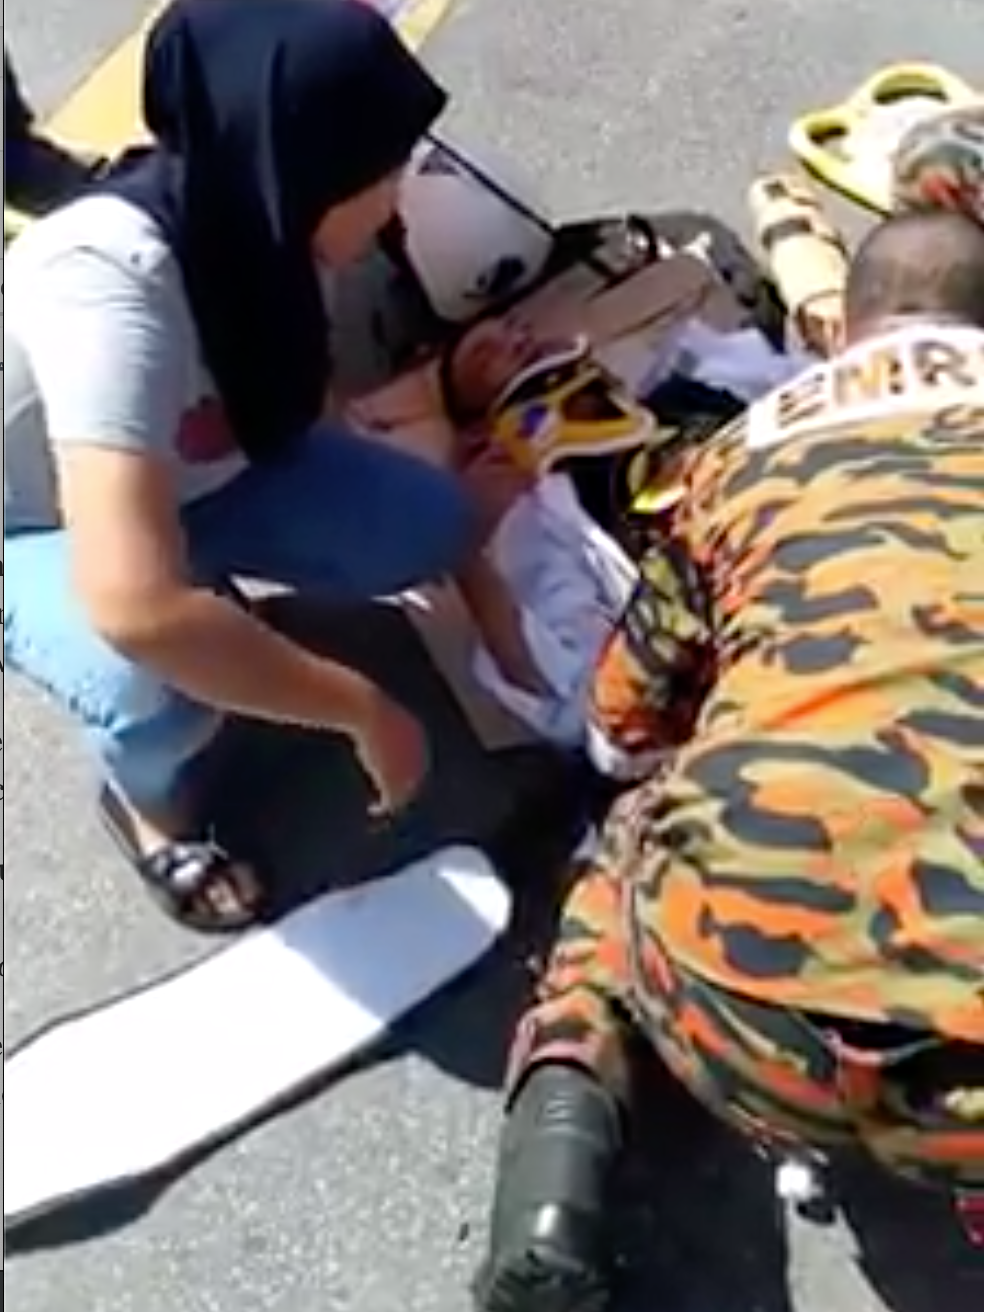 Injured Man Scolds Paramedics "Stupid" for Treating His Injuries - WORLD OF BUZZ